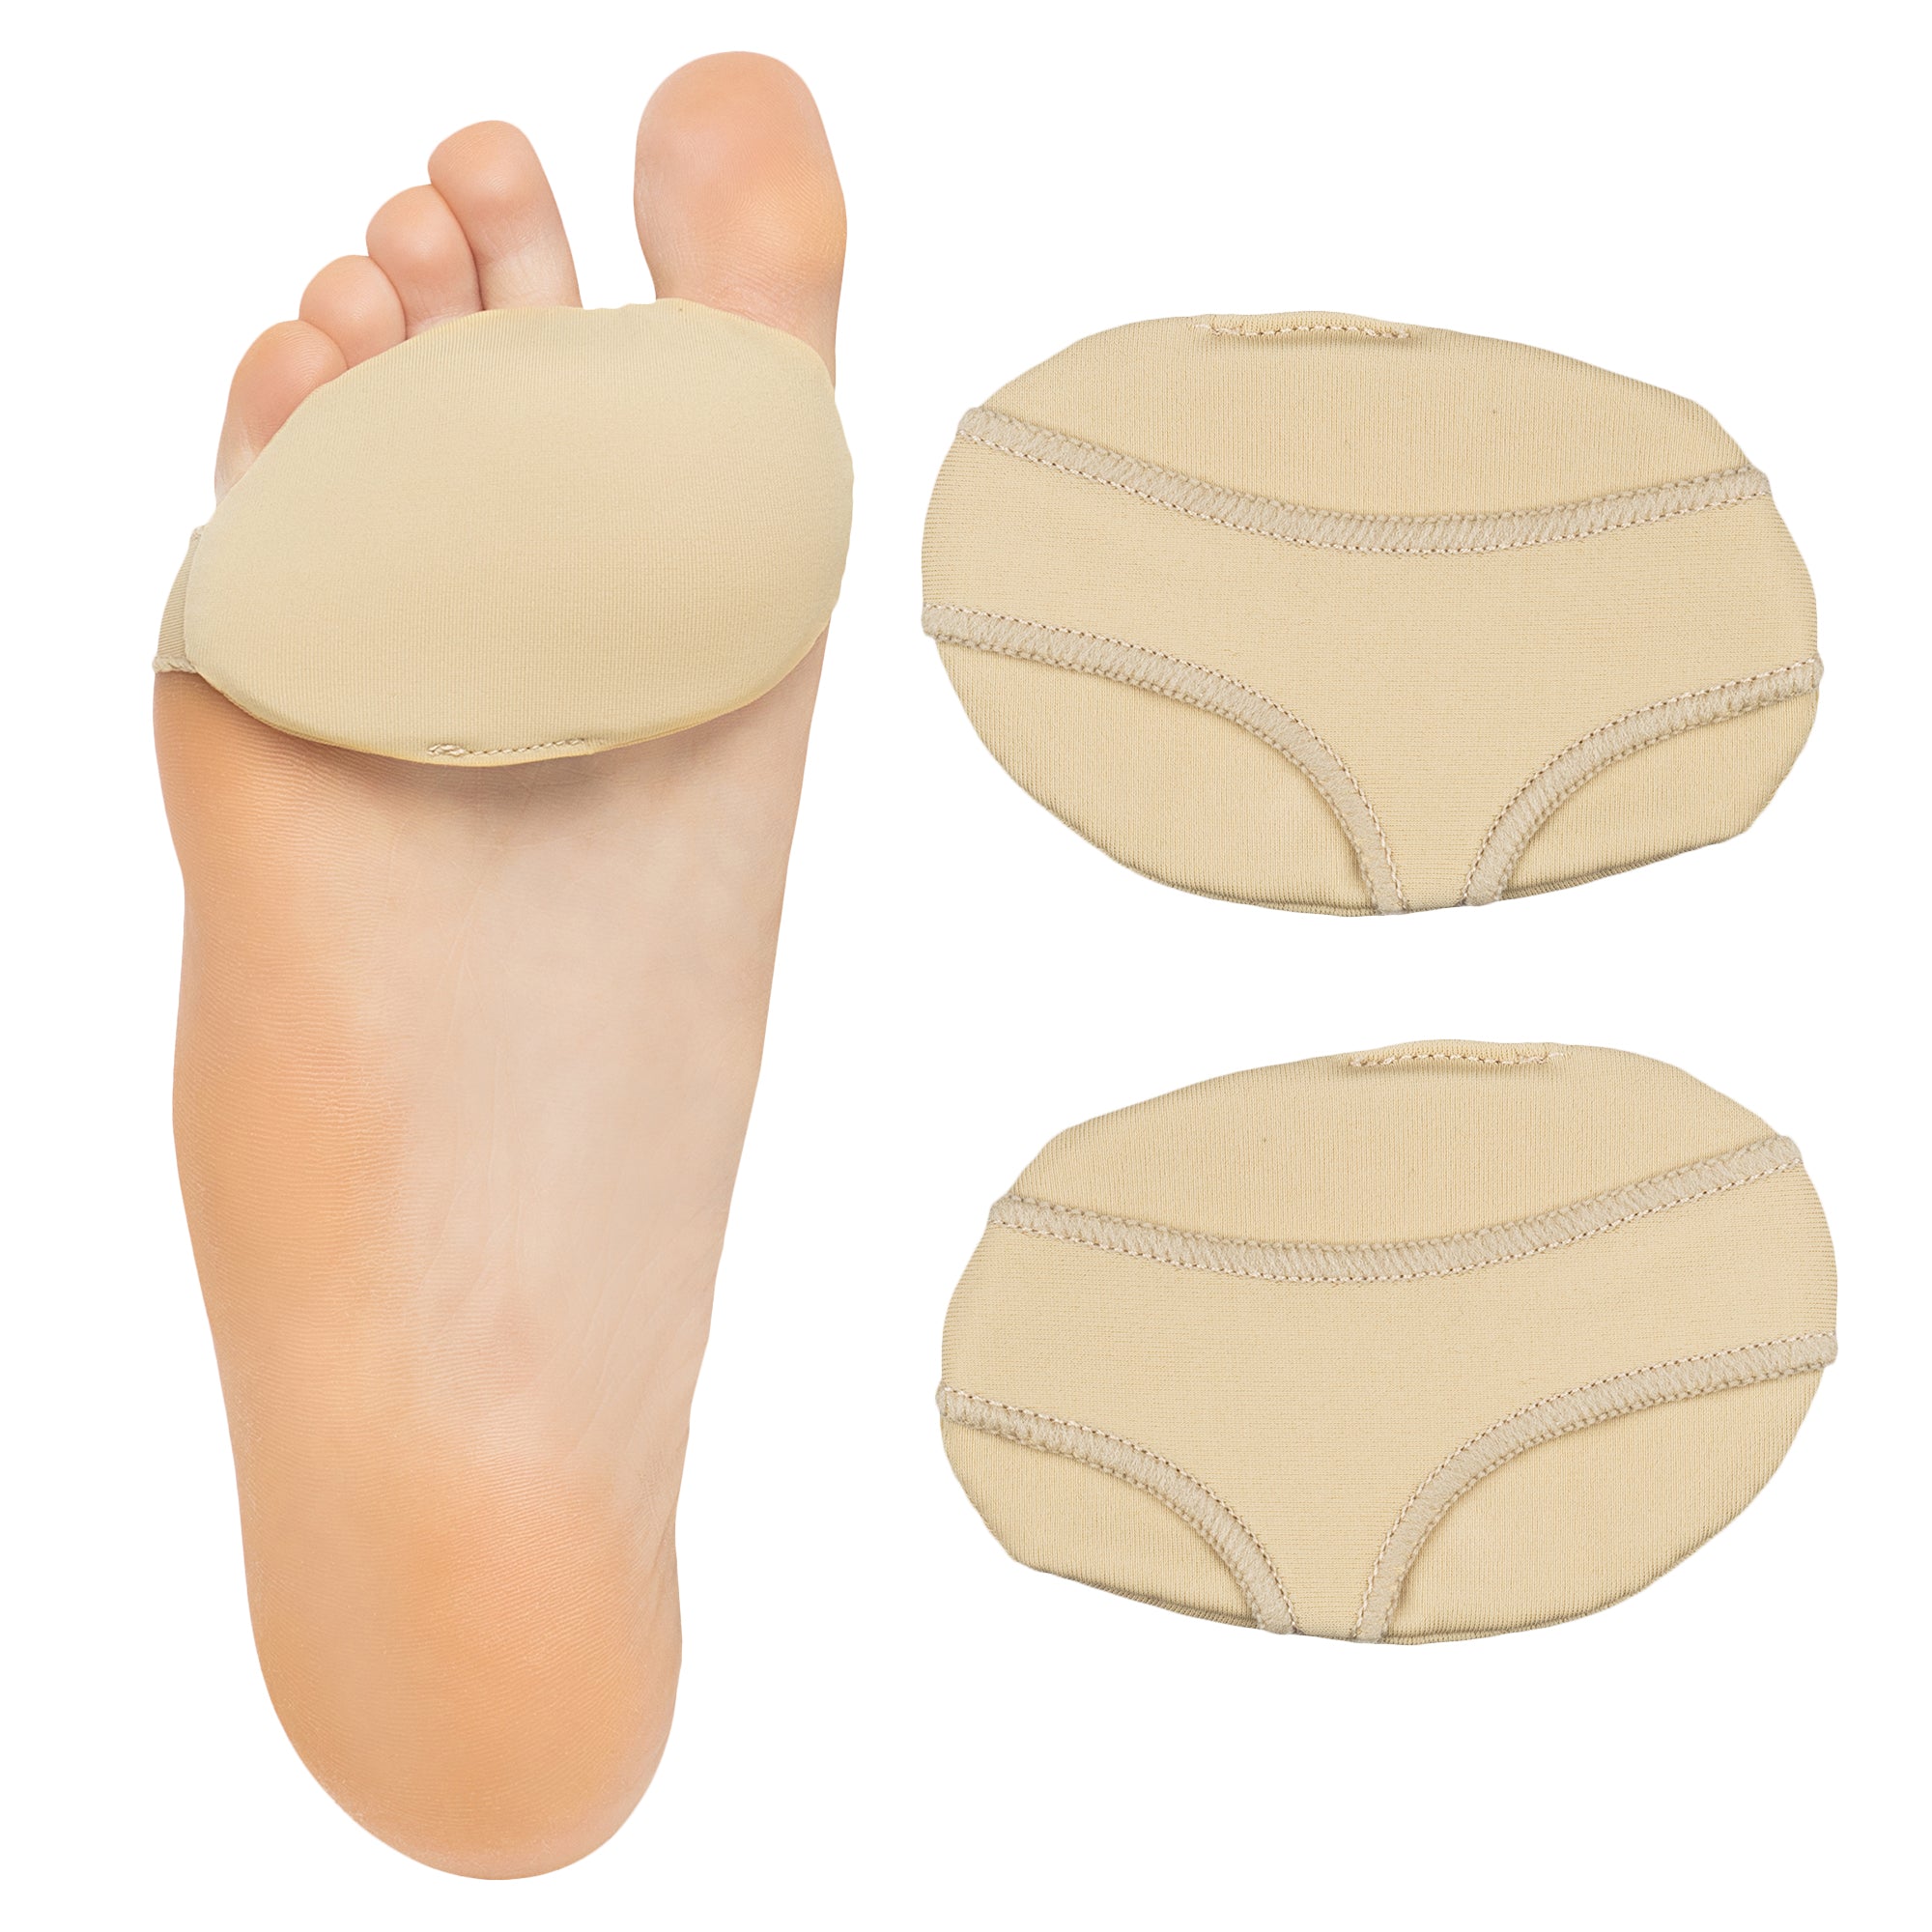 Heel Support Pads Orthotic Cushion Gel Cup Insoles UK For Plantar Fasciitis  Pain | eBay